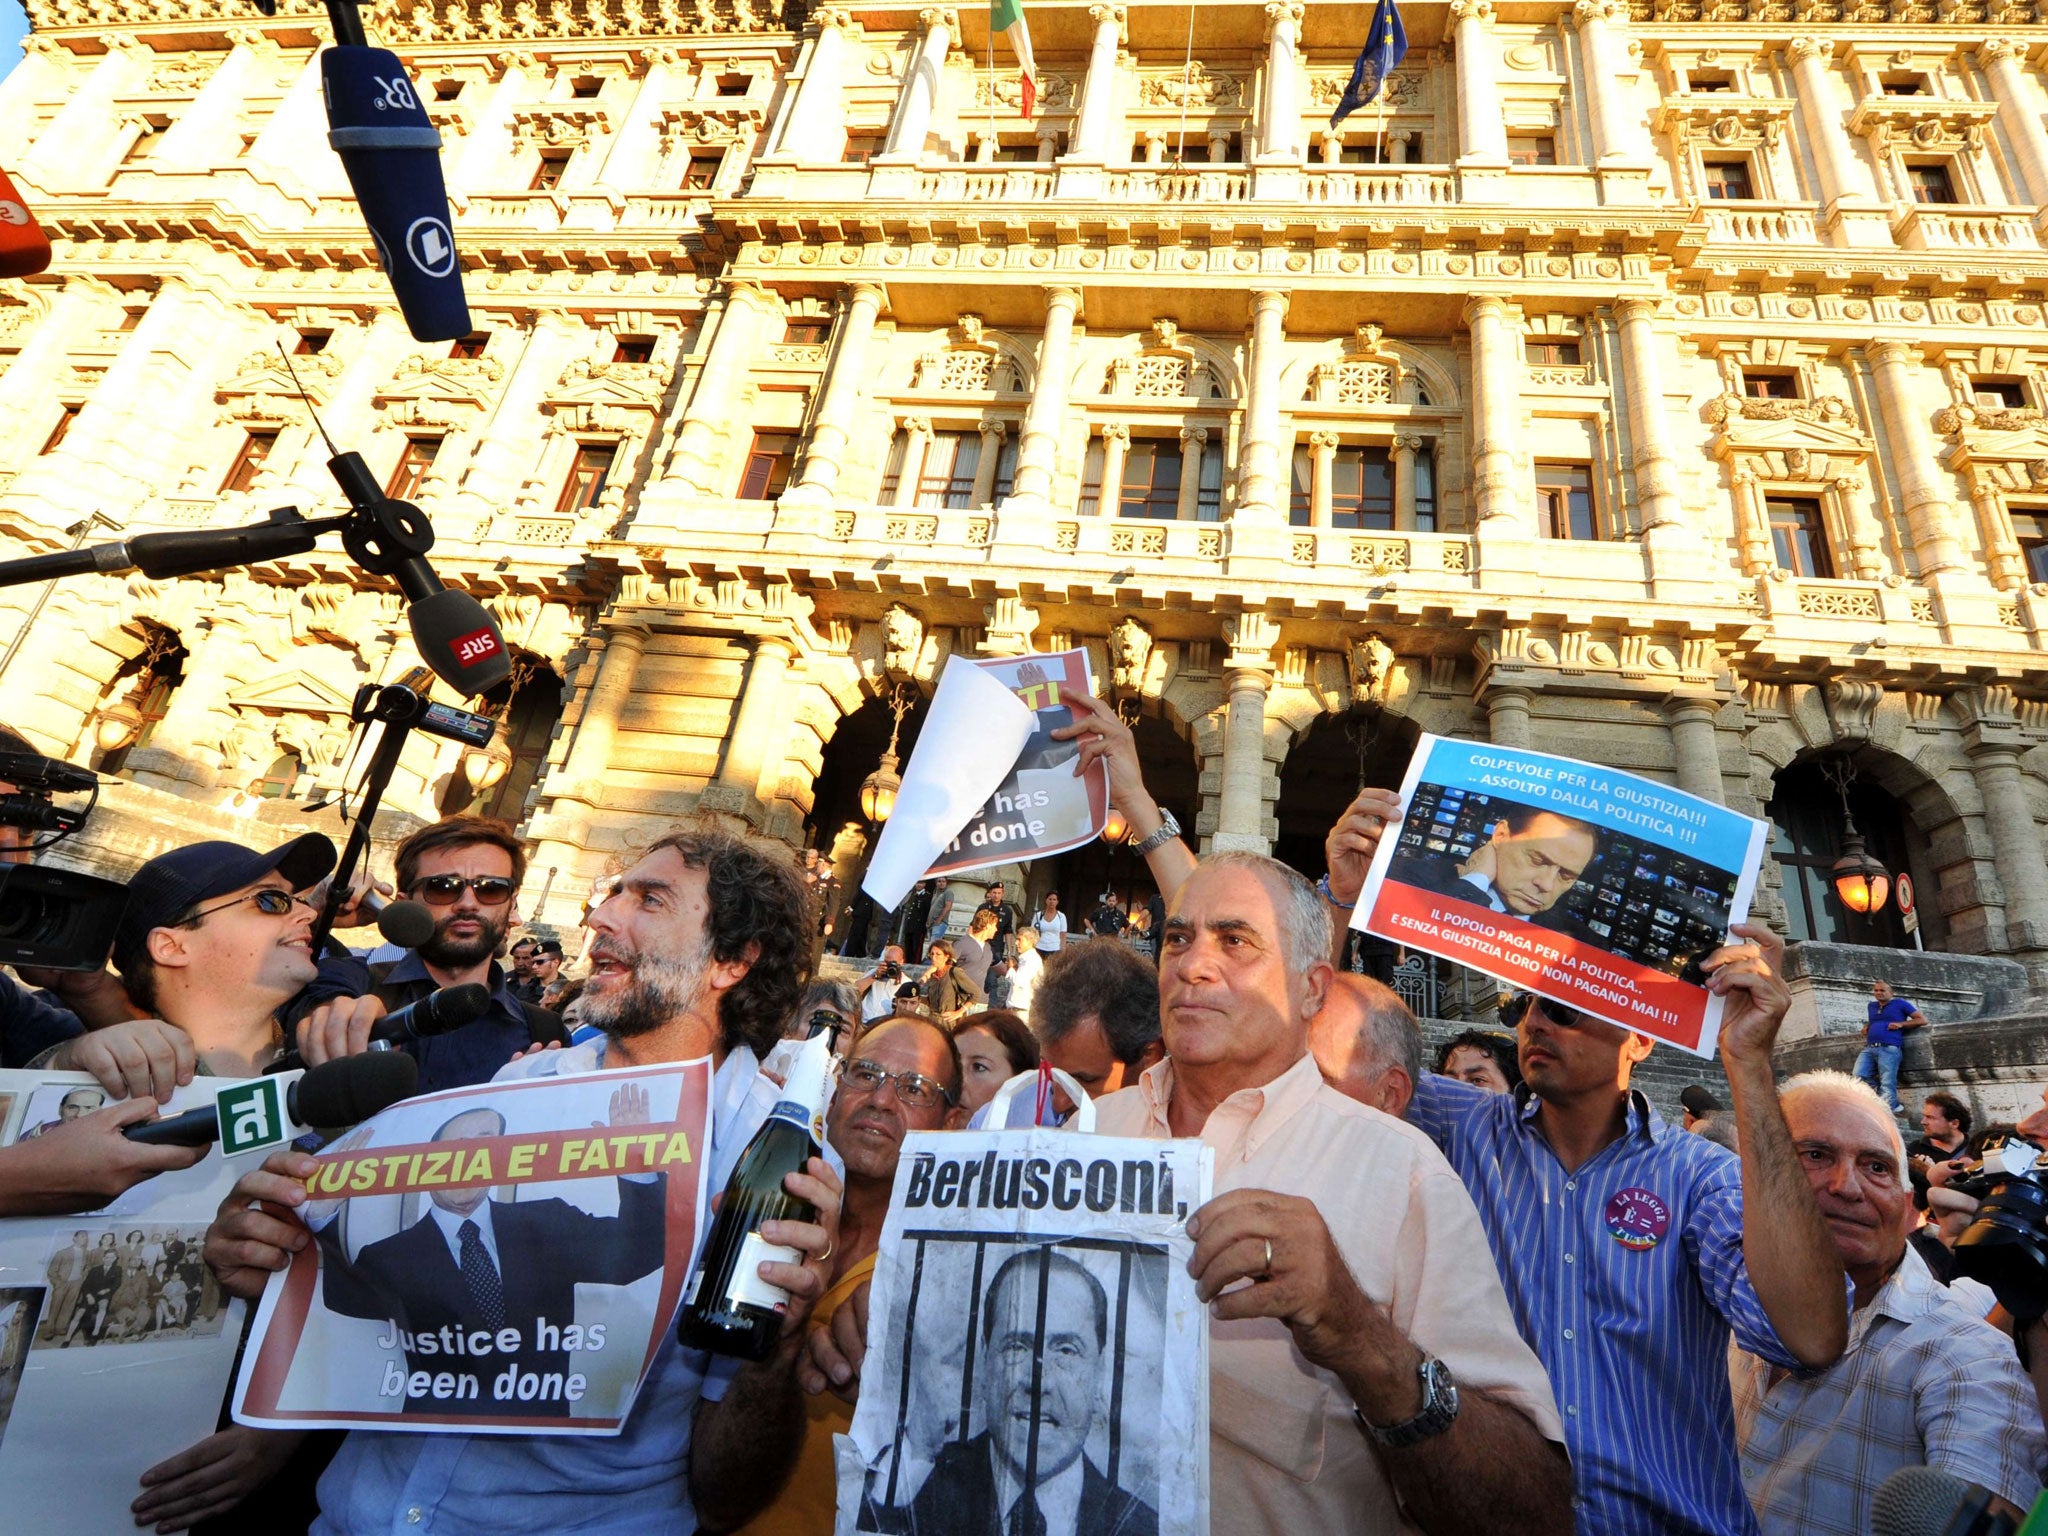 People hold signs as they celebrate the Italian Supreme Court's sentencing of Italian politician Silvio Berlusconi, in front of the Cassation building in Rome